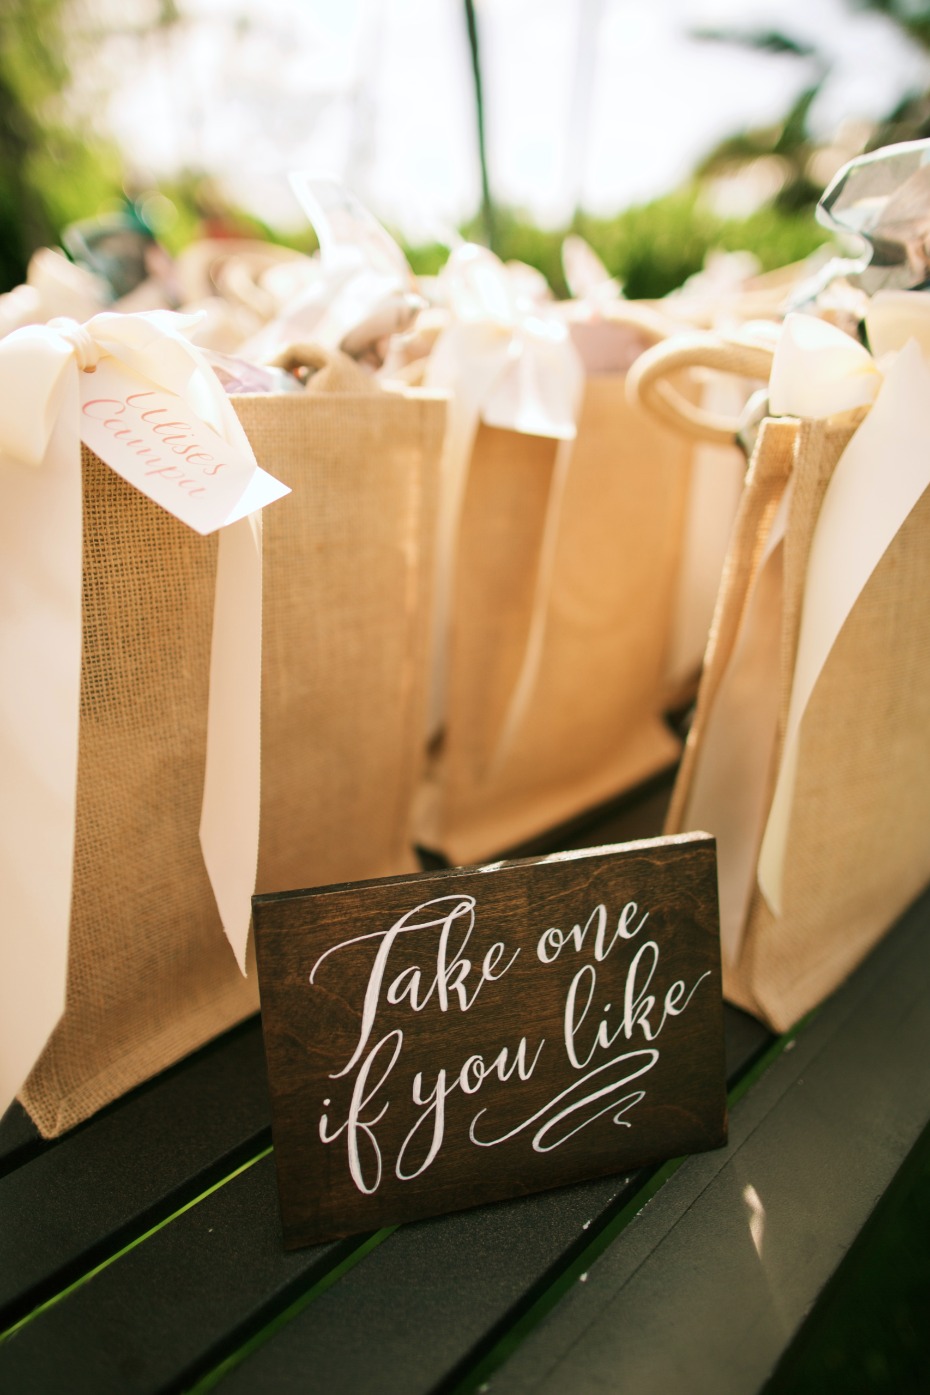 Cute favor bags for guests